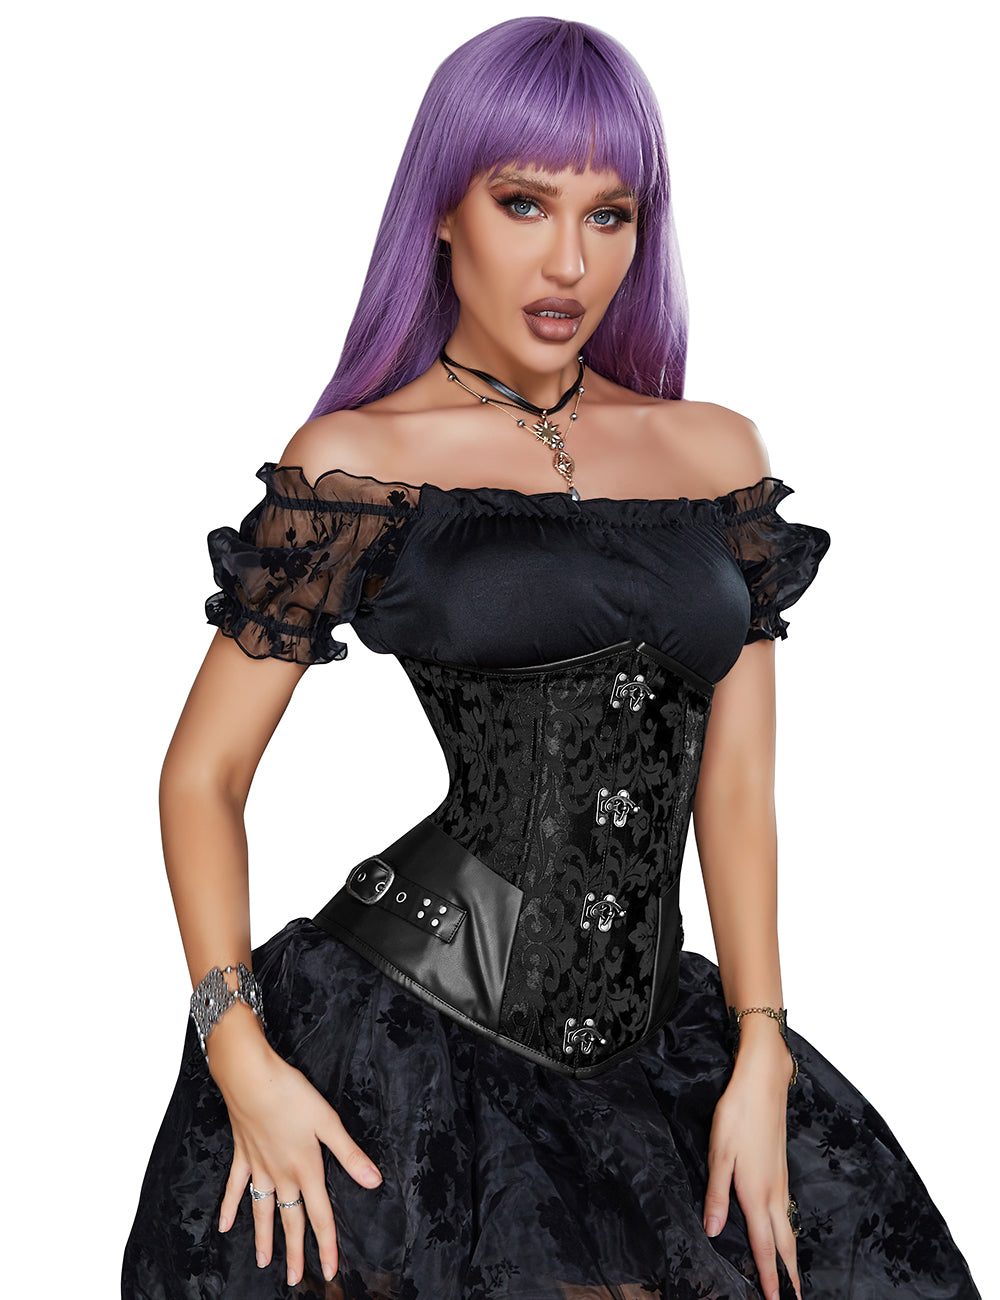 ohyeah corset top underbust corset with12 pieces soft steel bones corsets with panties palace tights bustier for woman